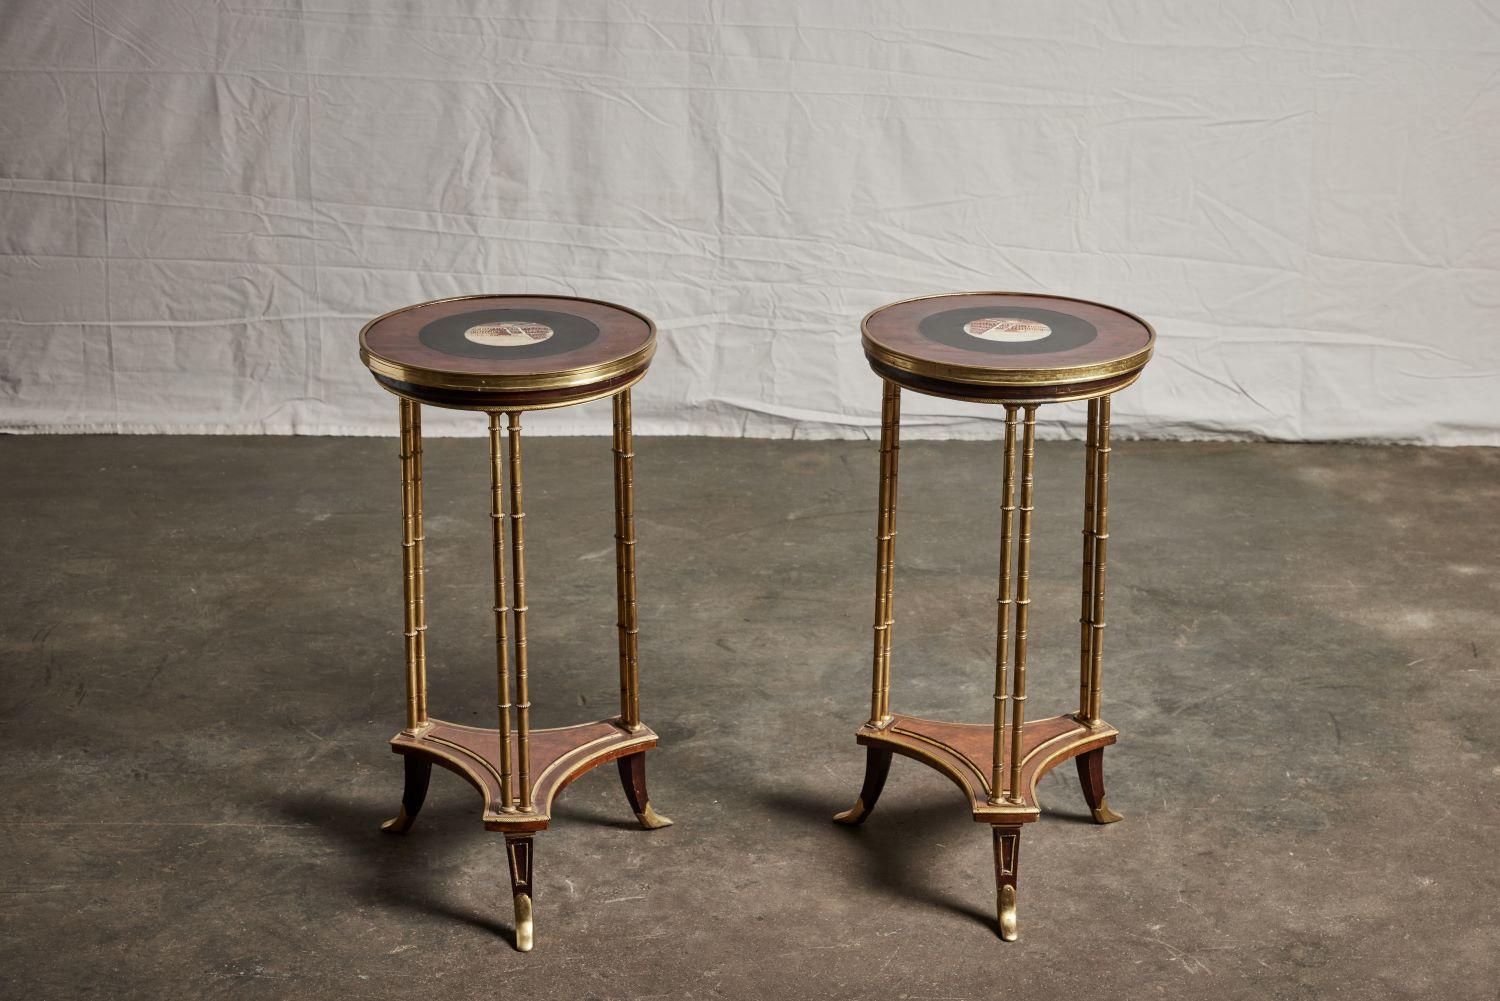 Wood Pair of 18th Century French Neoclassical Micromosaic Gueridon Side Tables